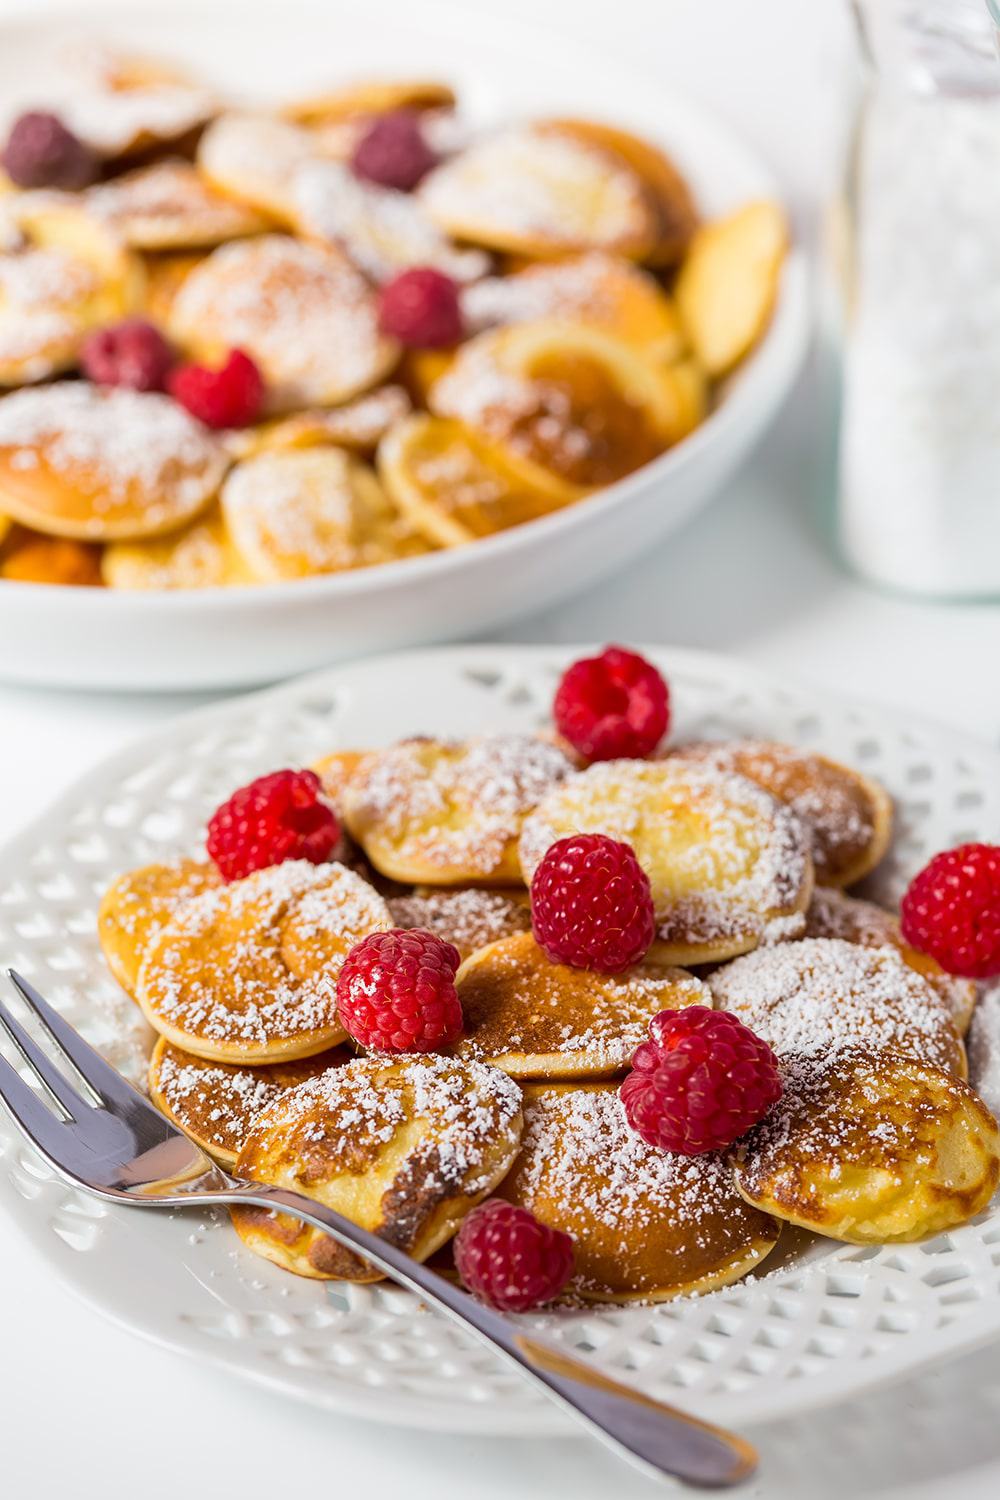 Poffertjes Are What Pancakes Were Born To Be | Cooking Clue